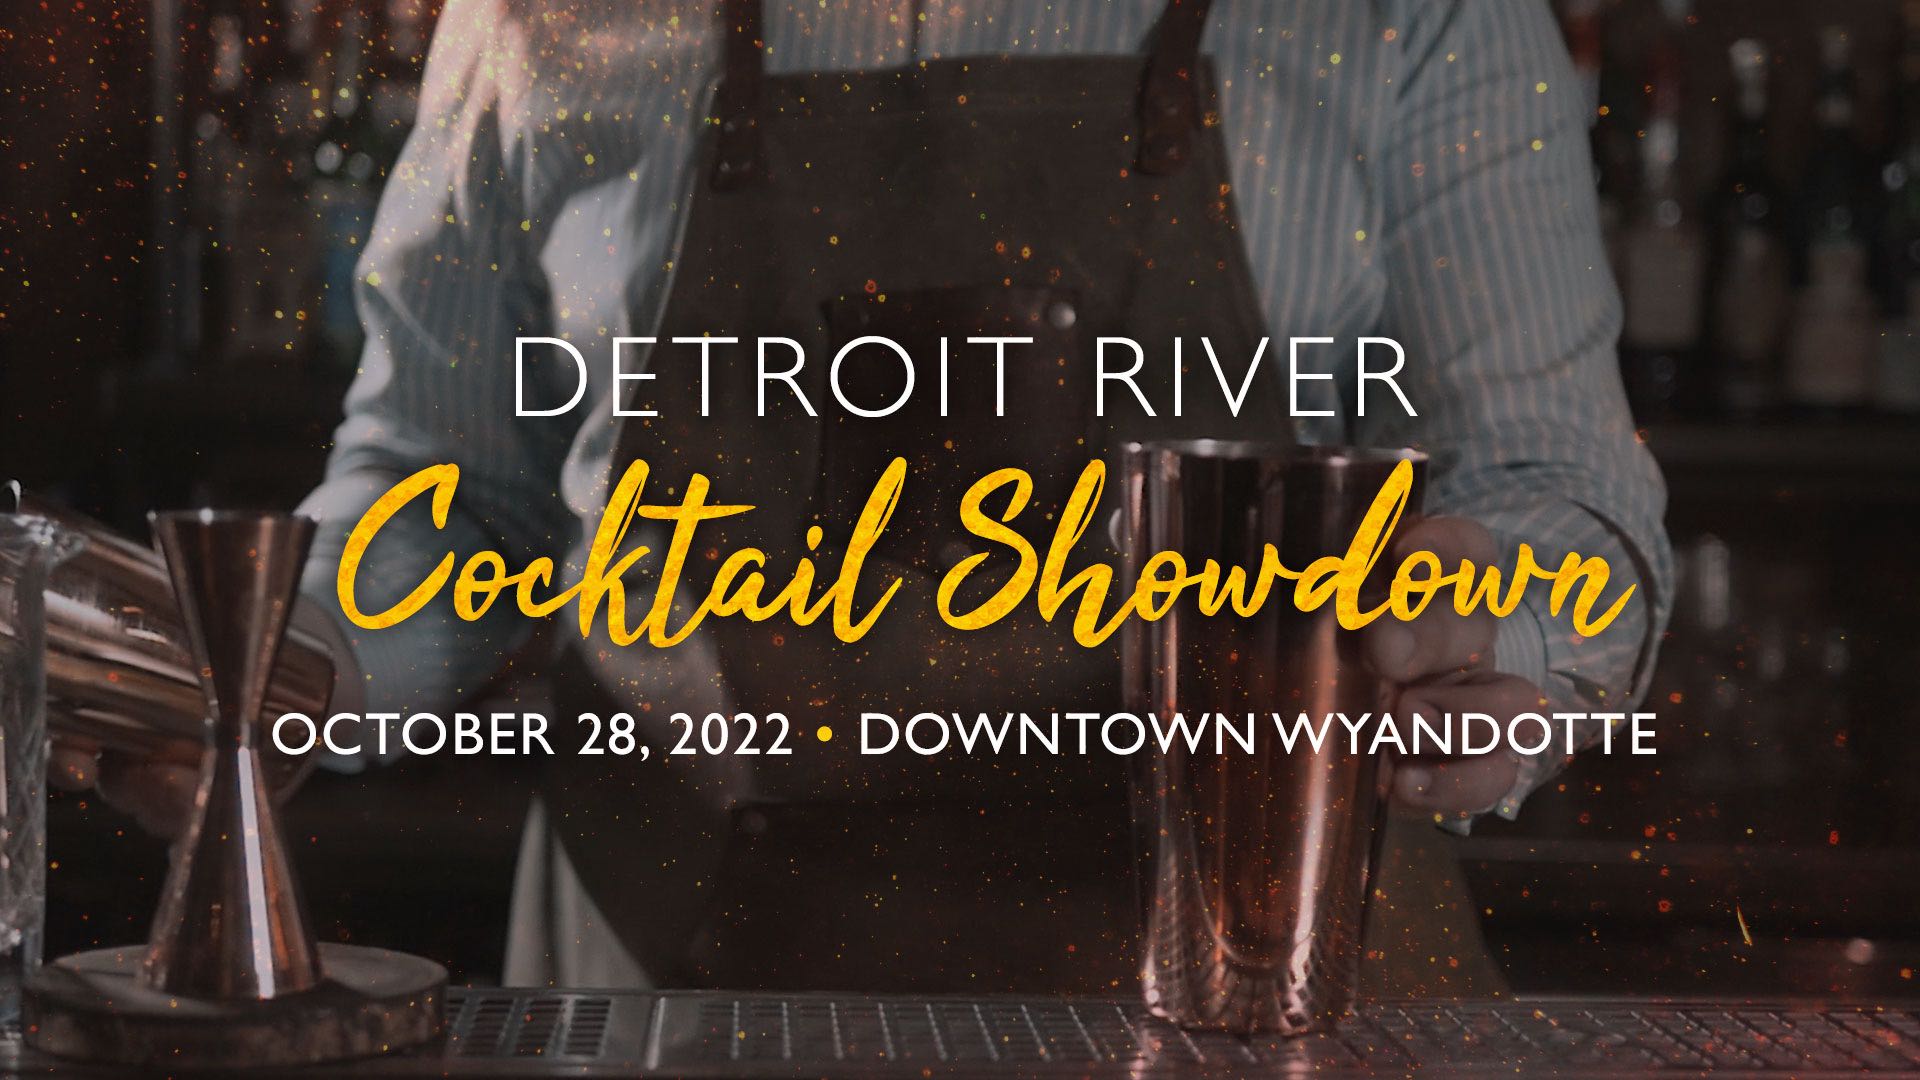 Detroit River Cocktail Showdown, October 28, 2022 in Downtown Wyandotte; featuring image of bartender with mixer cup in background